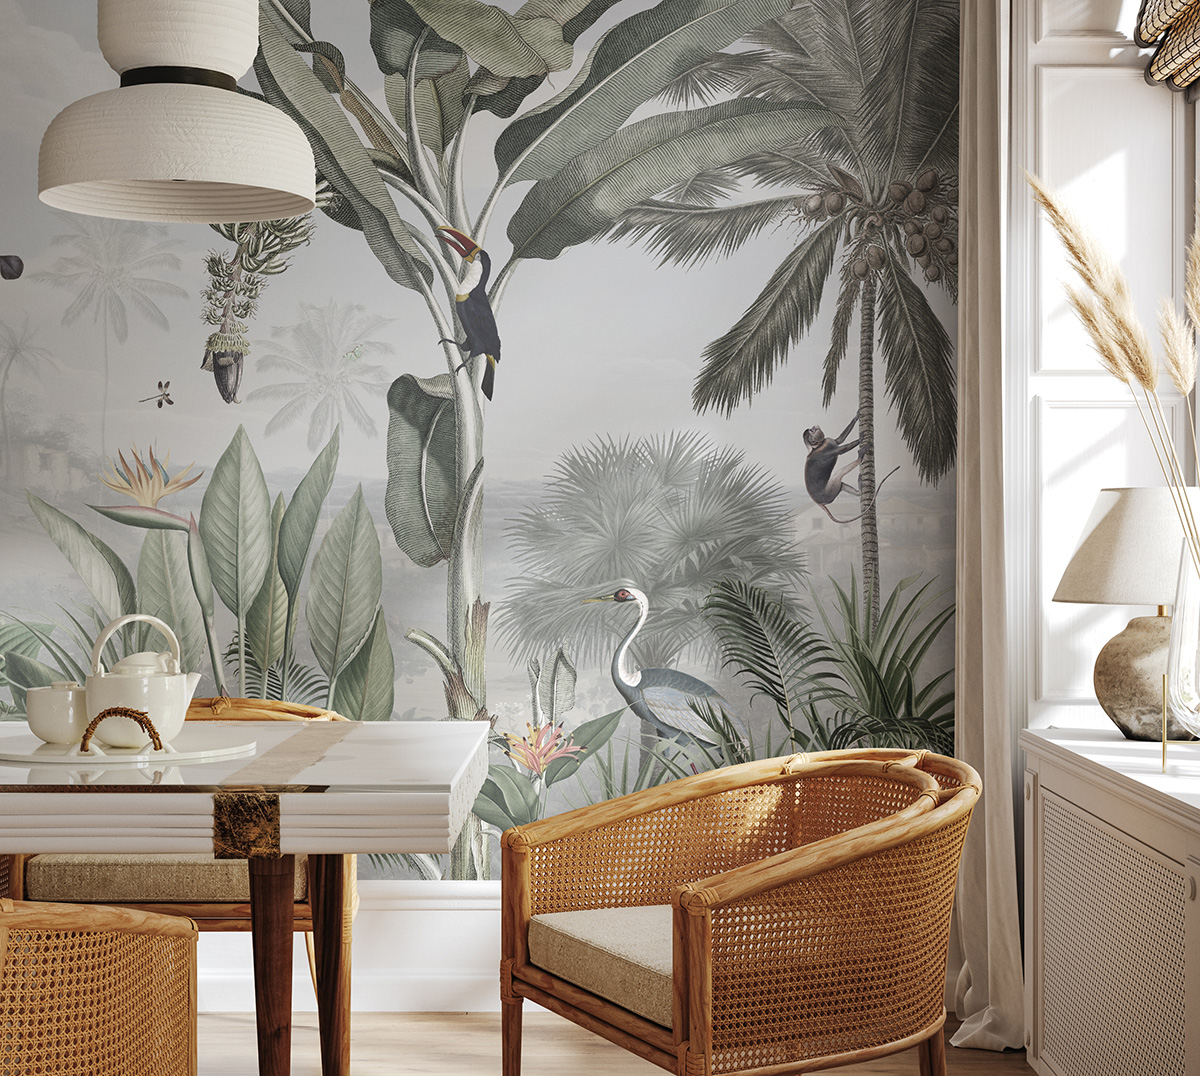 Botanical Beauty Jungle Wallpaper Mural in dining room